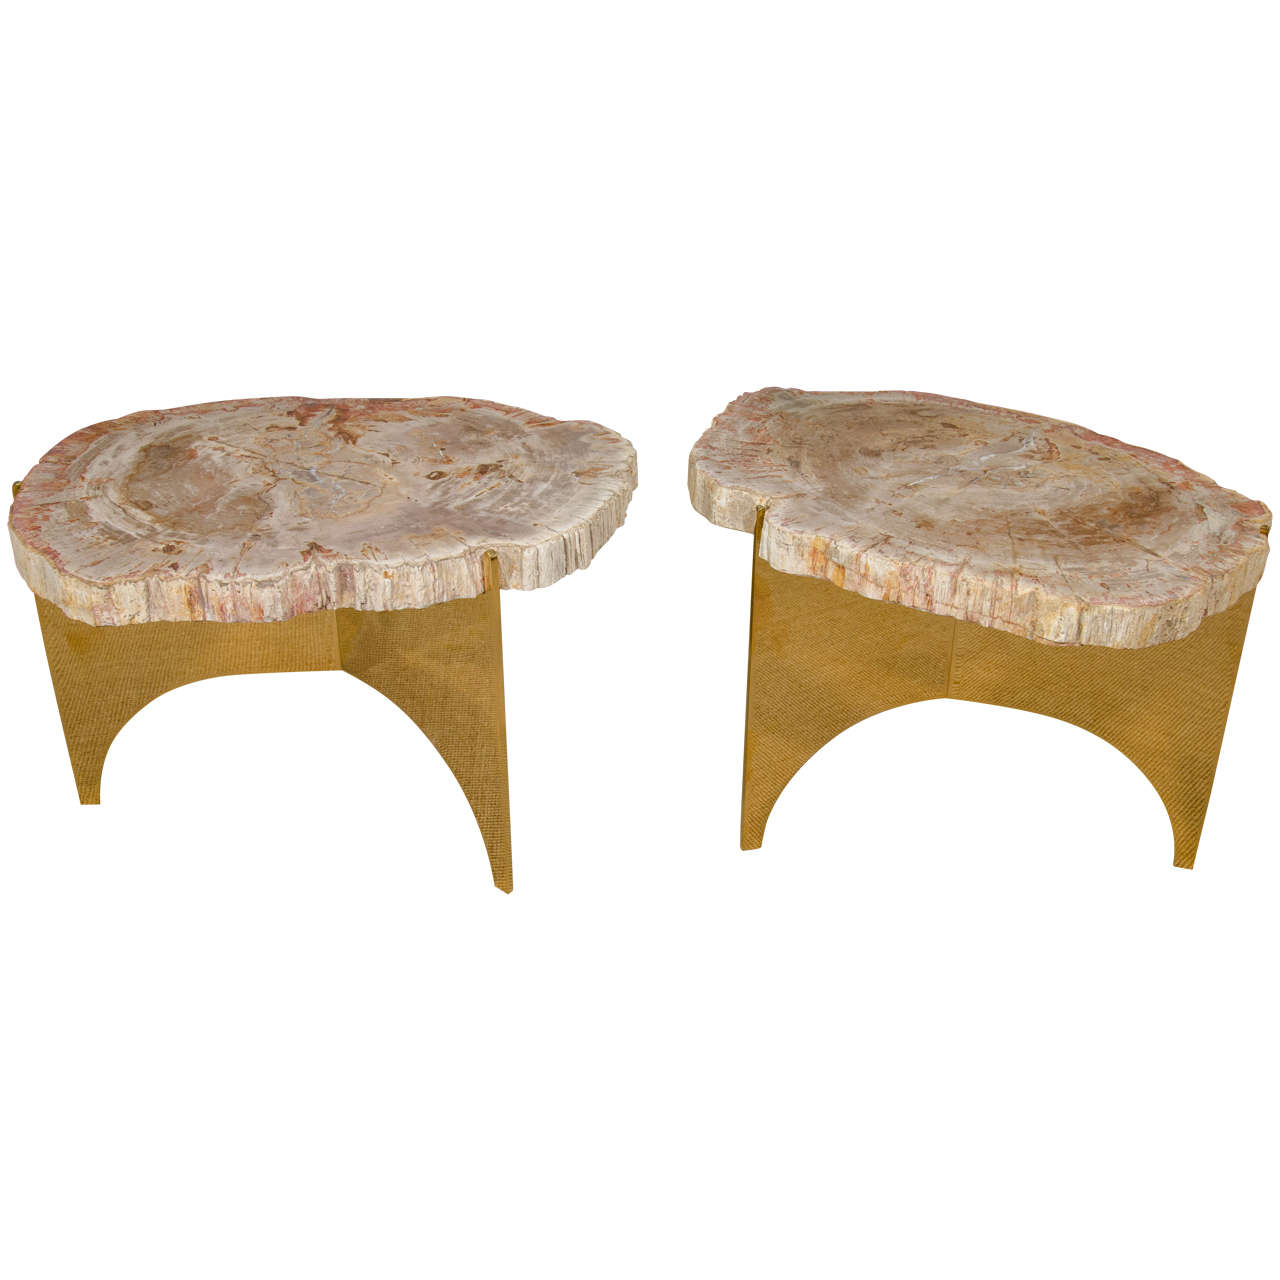 Limited Edition Custom-Made Petrified Wood and Polished Bronze Table For Sale